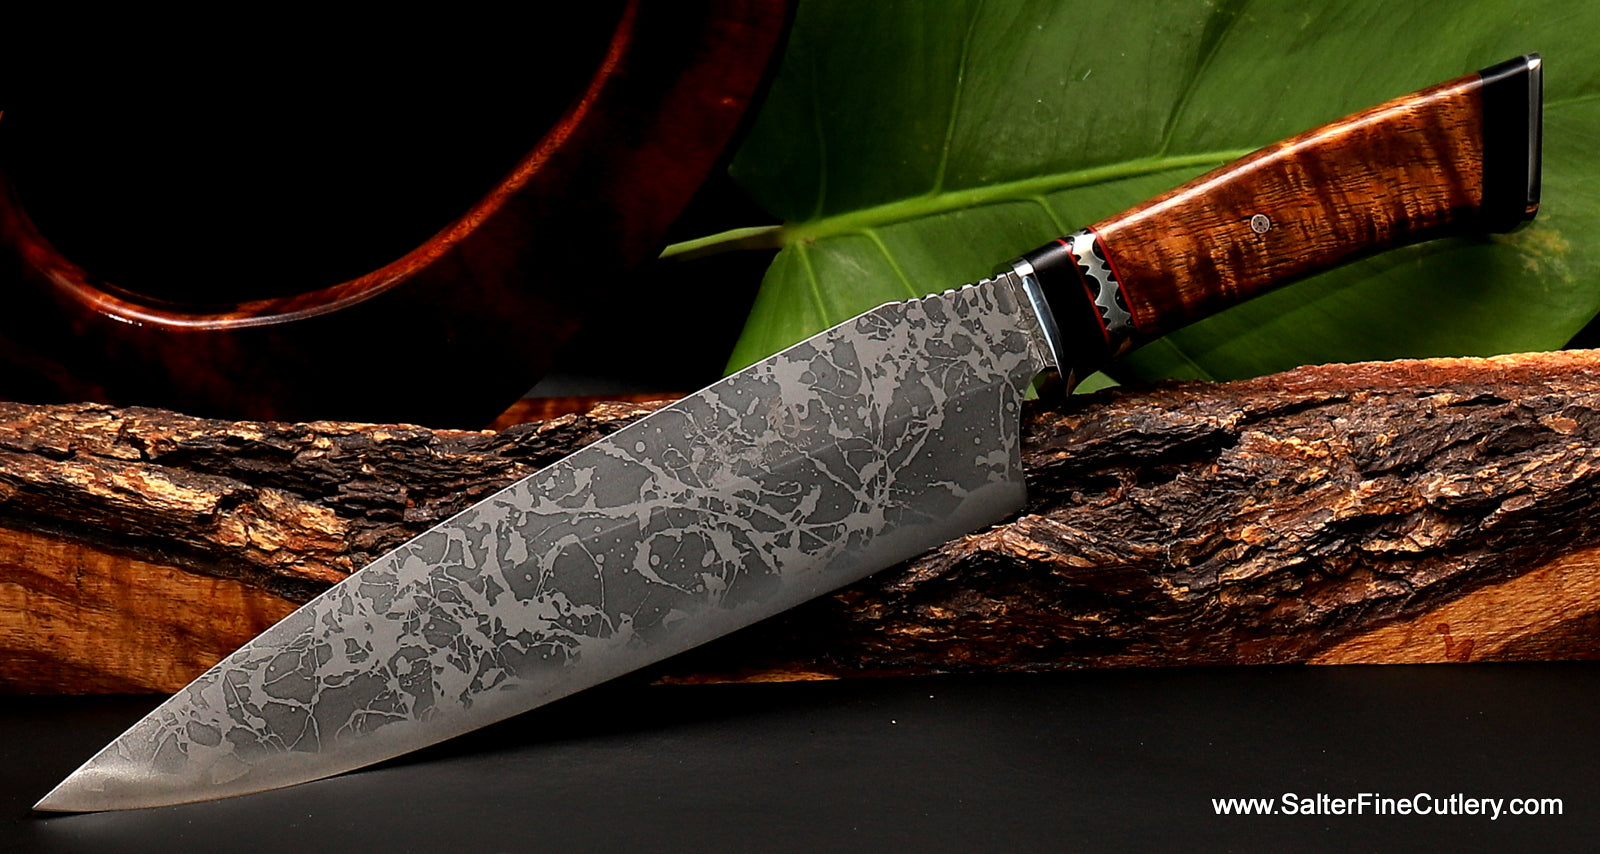 New MkII Limited Edition collectible knife; a Salter Kiku collaboration from Salter Fine Cutlery of Hawaii